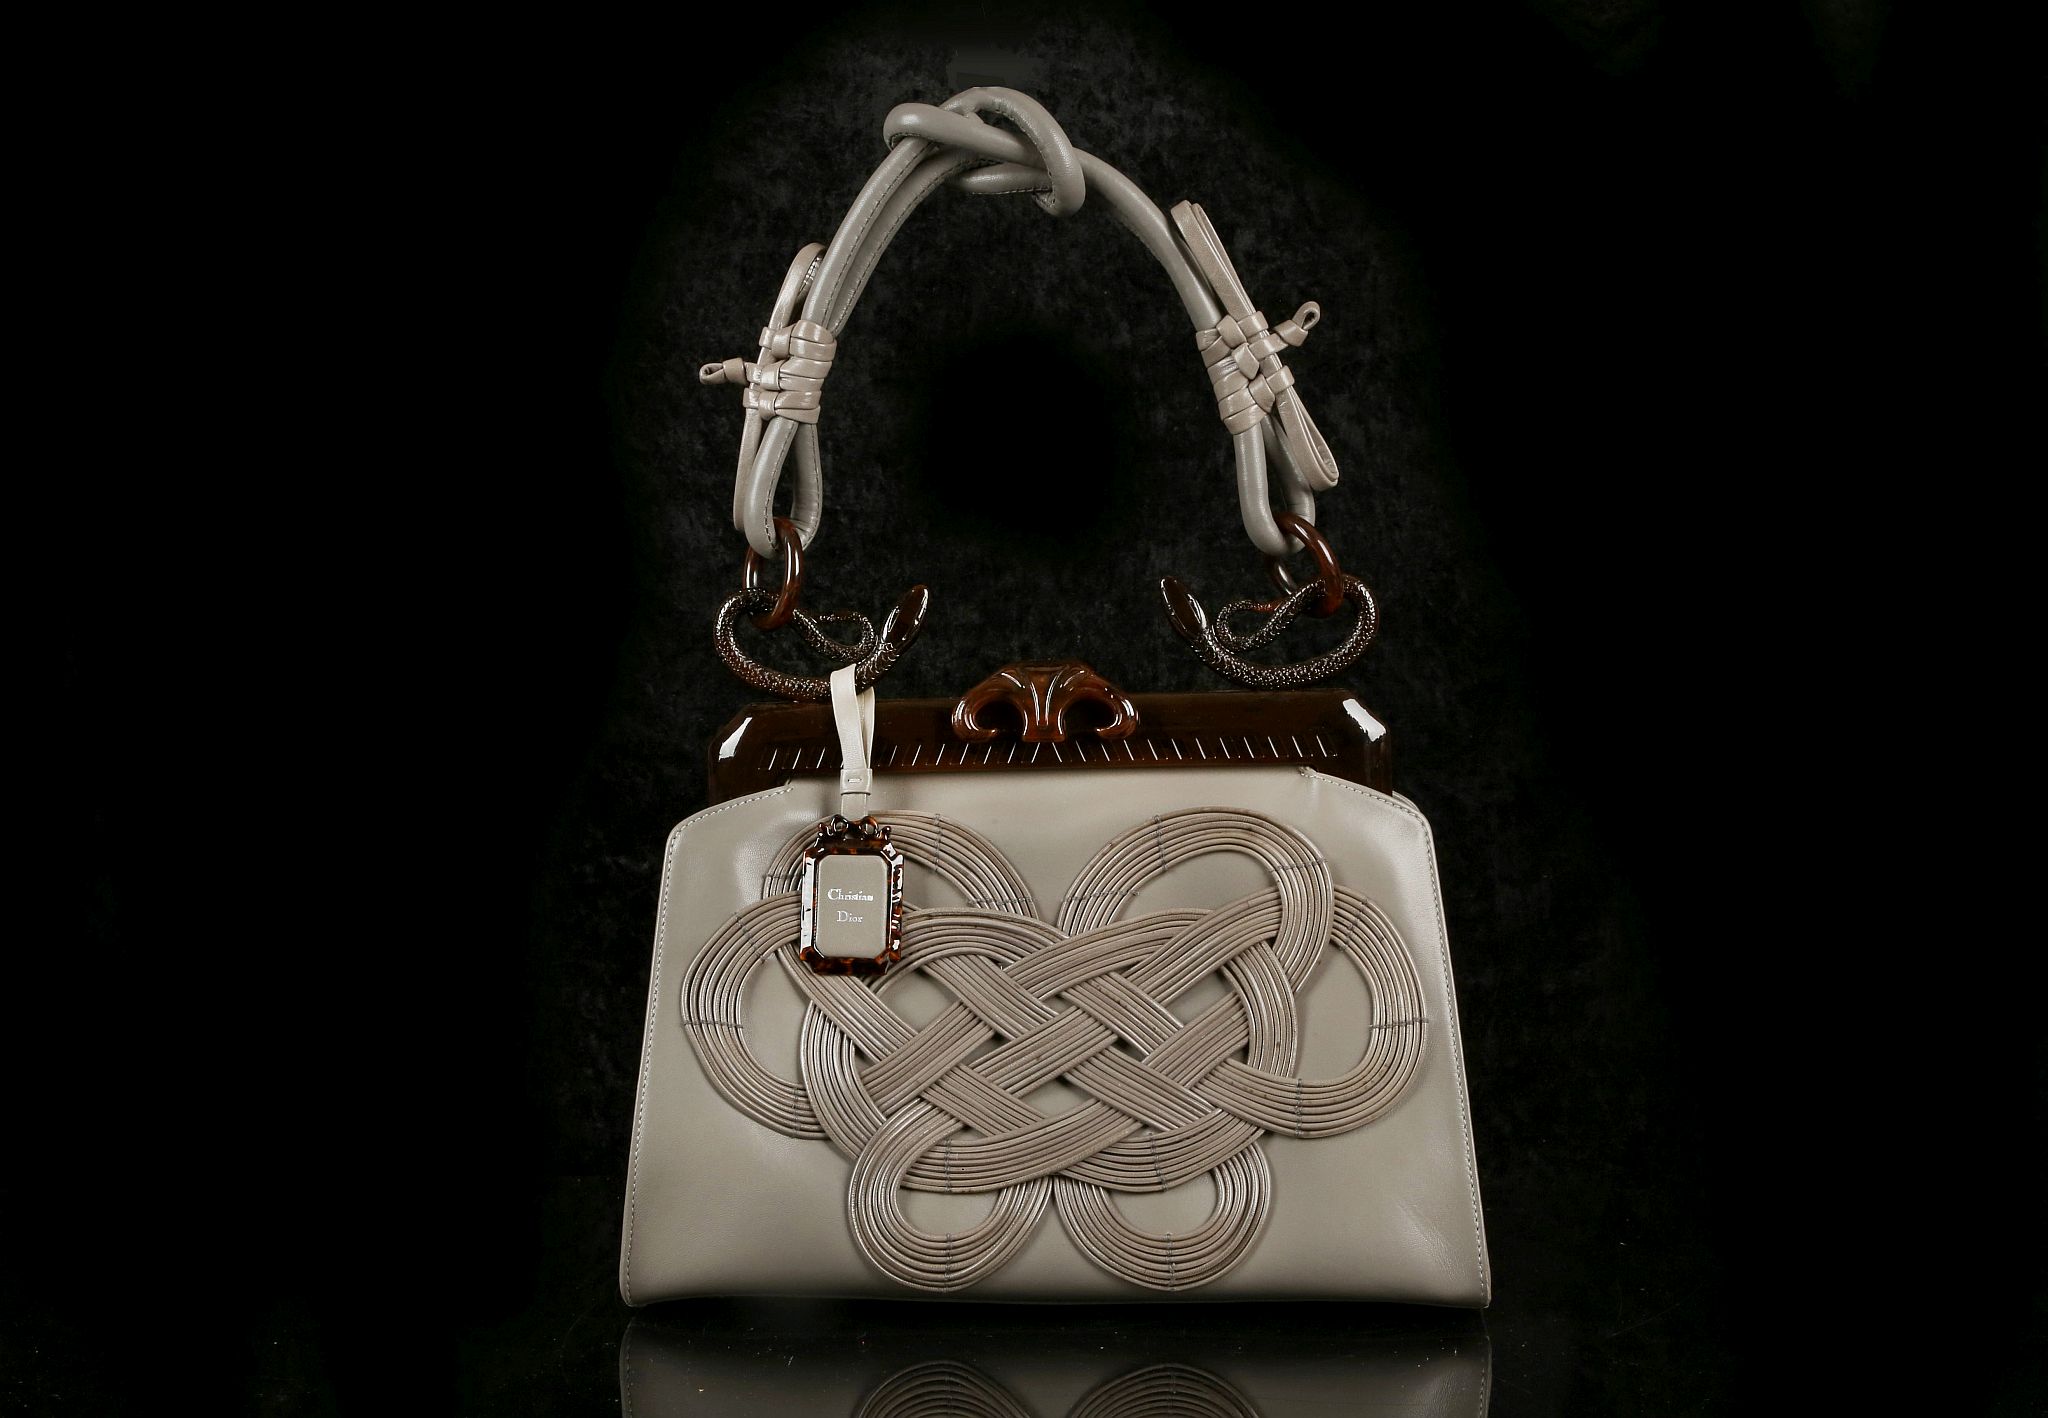 CHRISTIAN DIOR 1947 KNOT SAMOURAI HANDBAG, limited edition and numbered 0531, grey lambskin with - Image 2 of 14